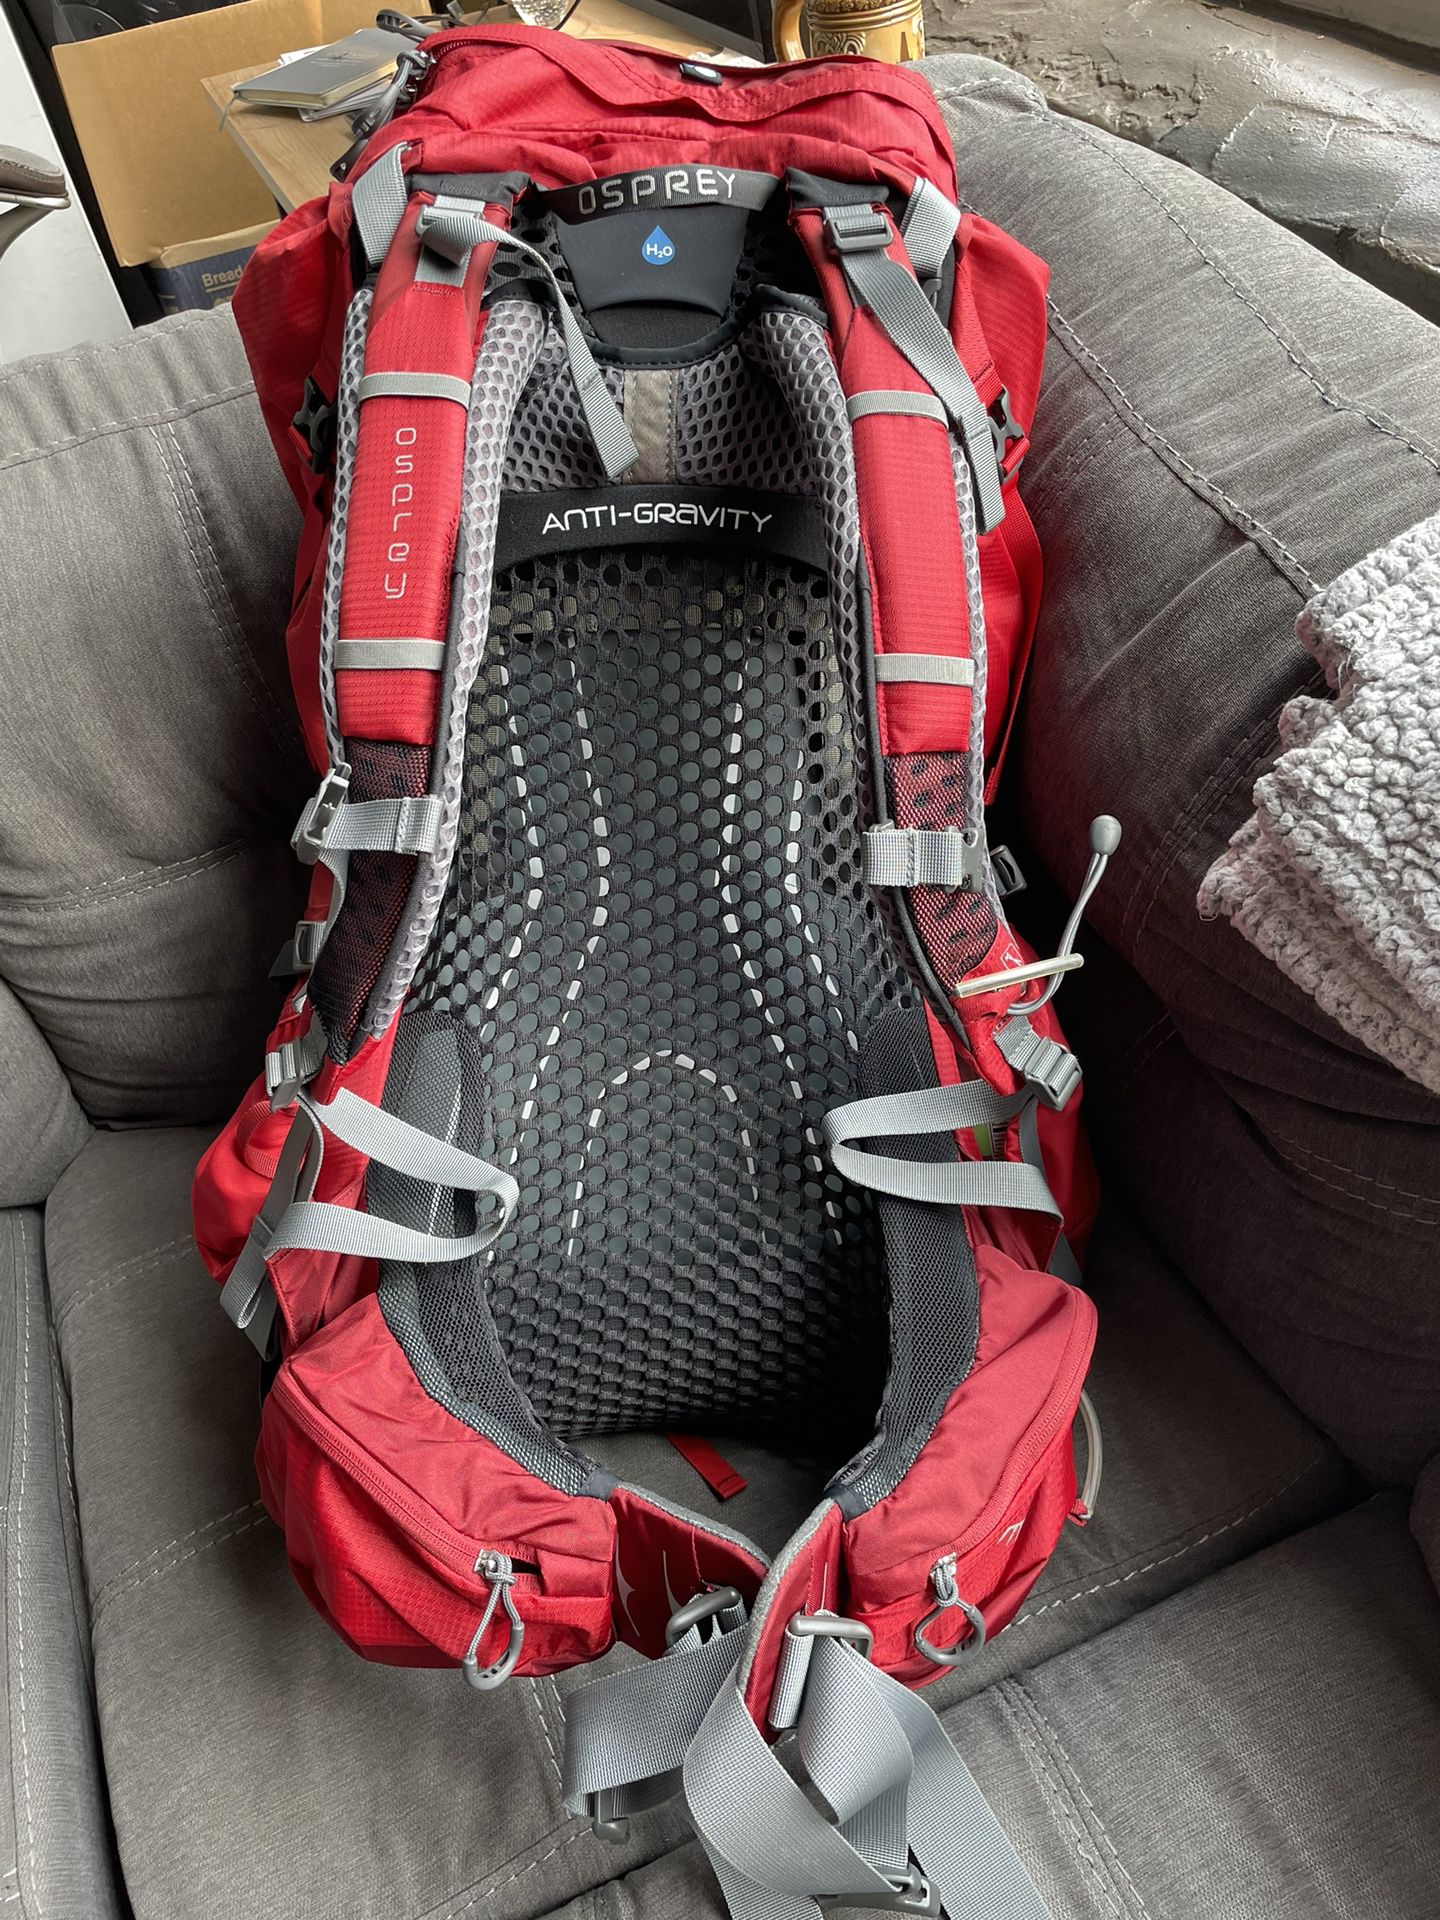 Osprey Atmo 50L Rare Red Brand New With Tags